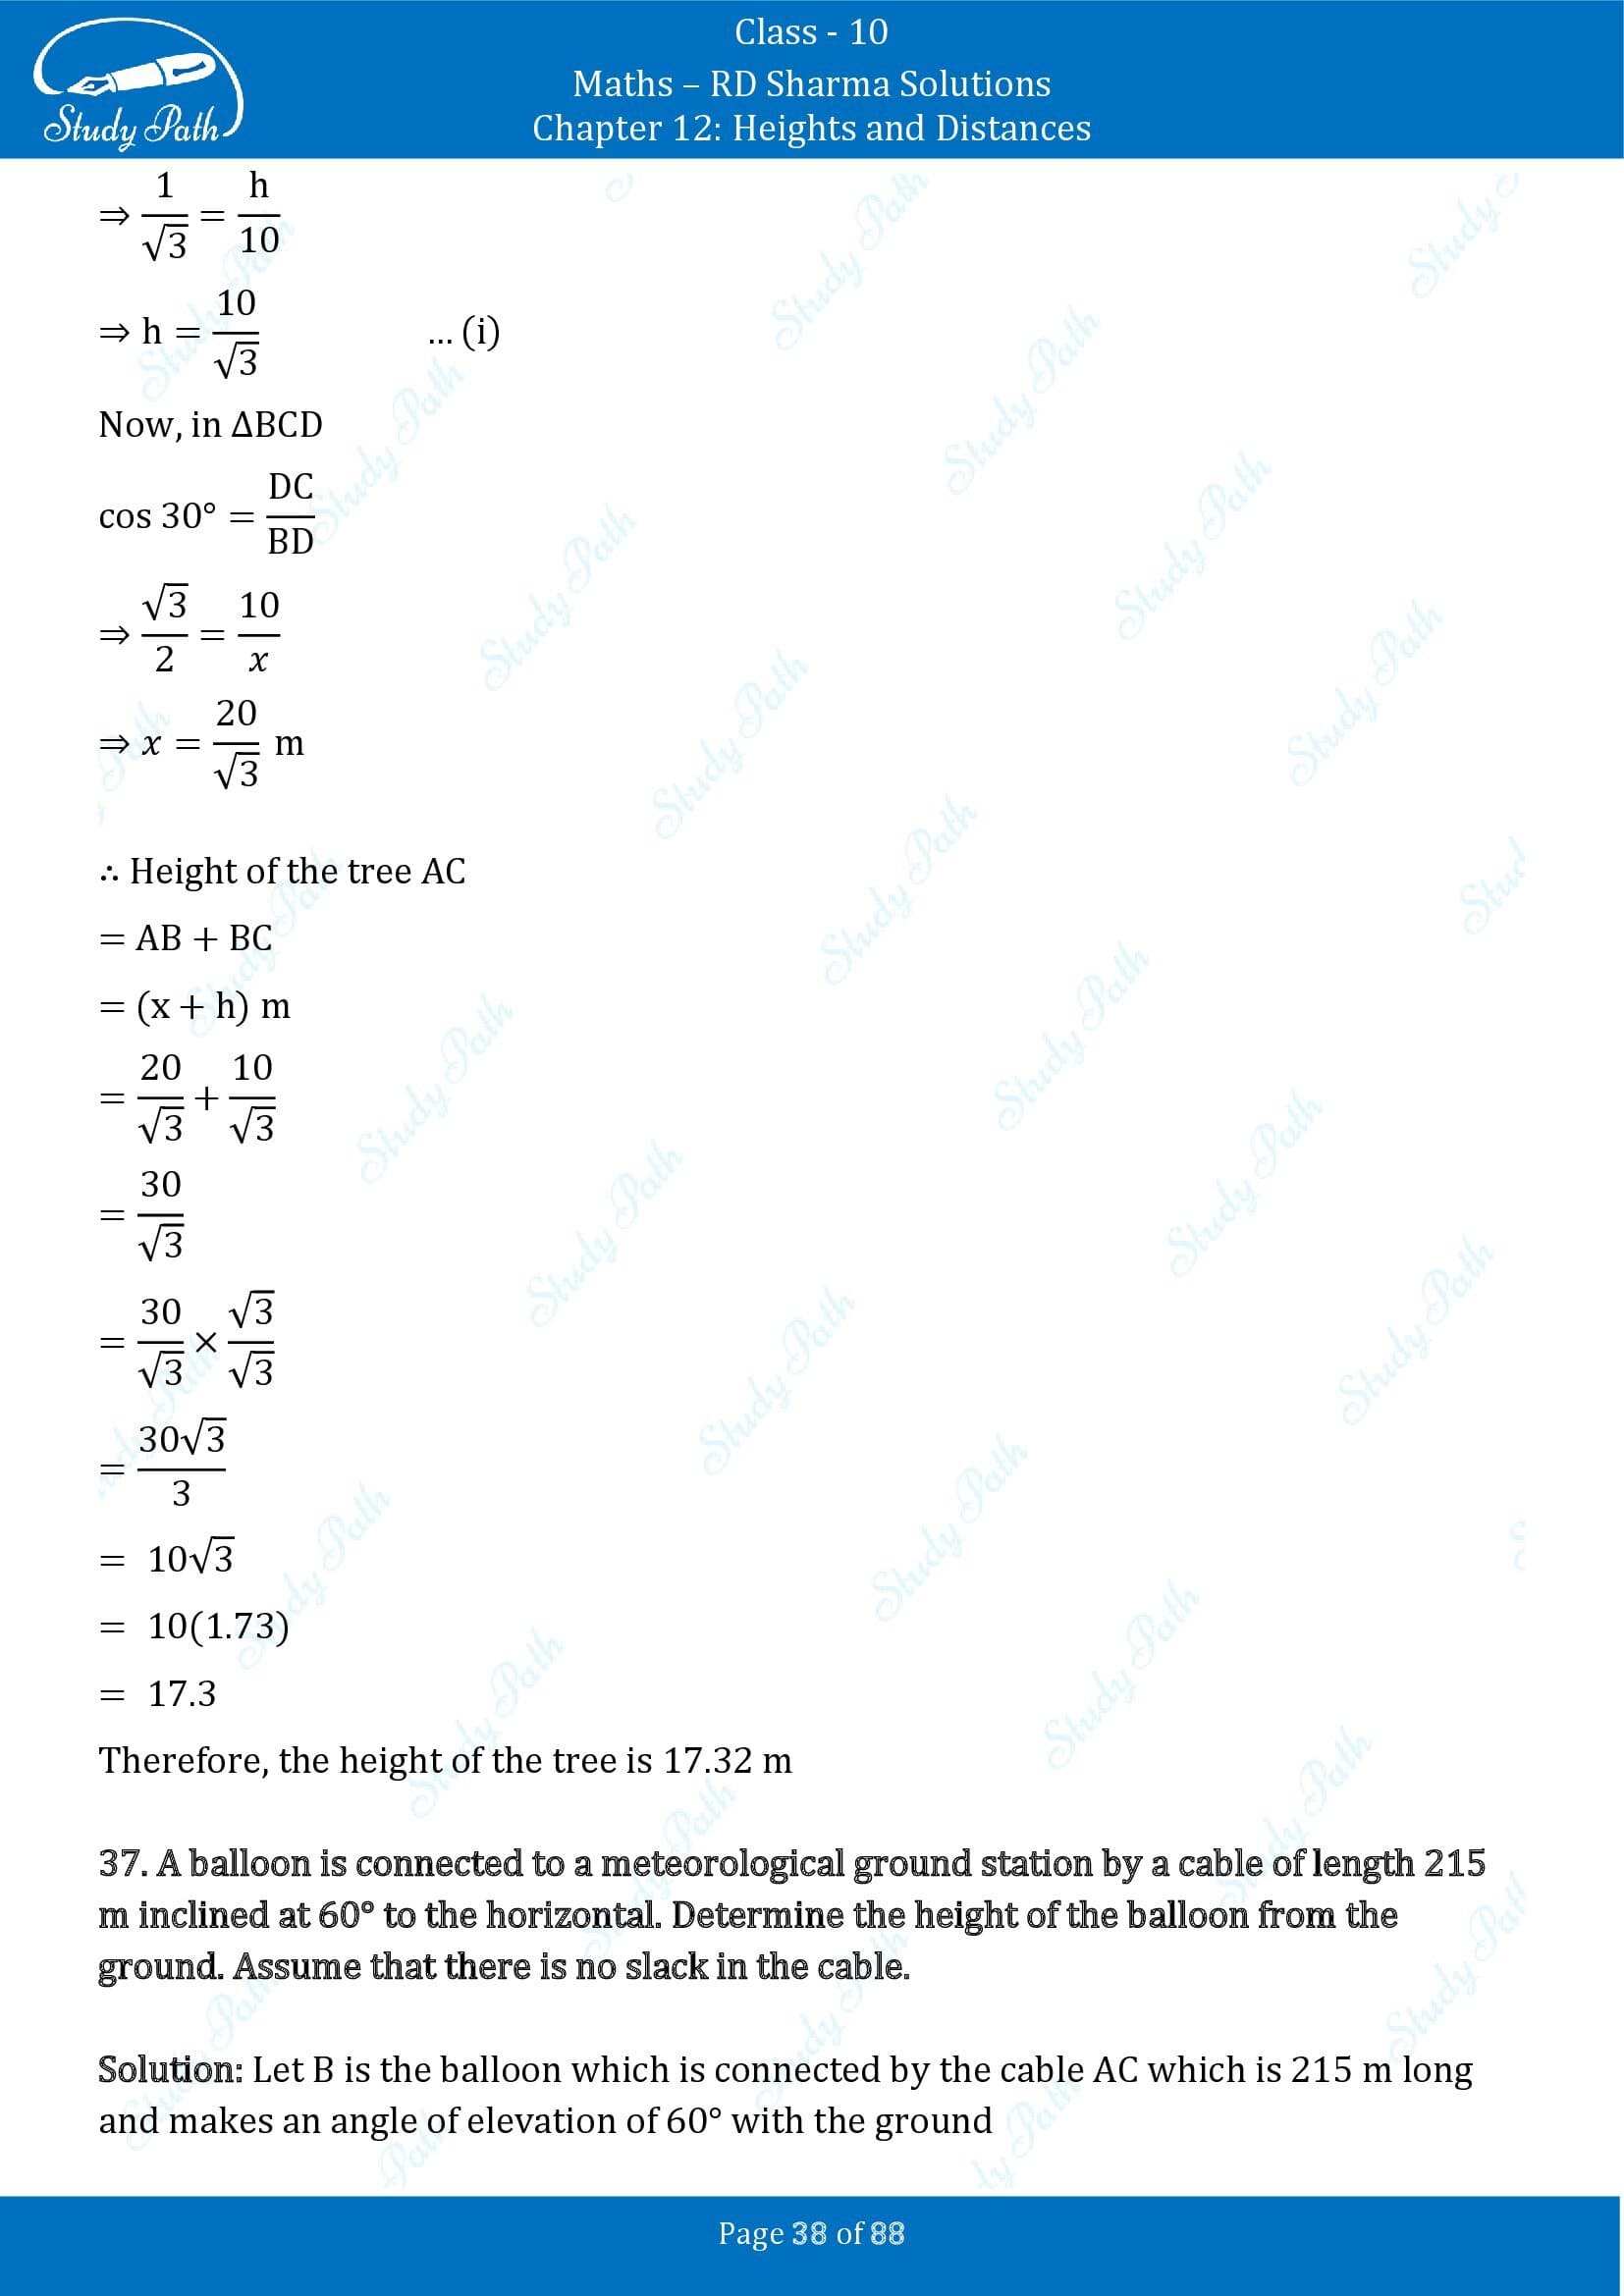 RD Sharma Solutions Class 10 Chapter 12 Heights and Distances Exercise 12.1 00038